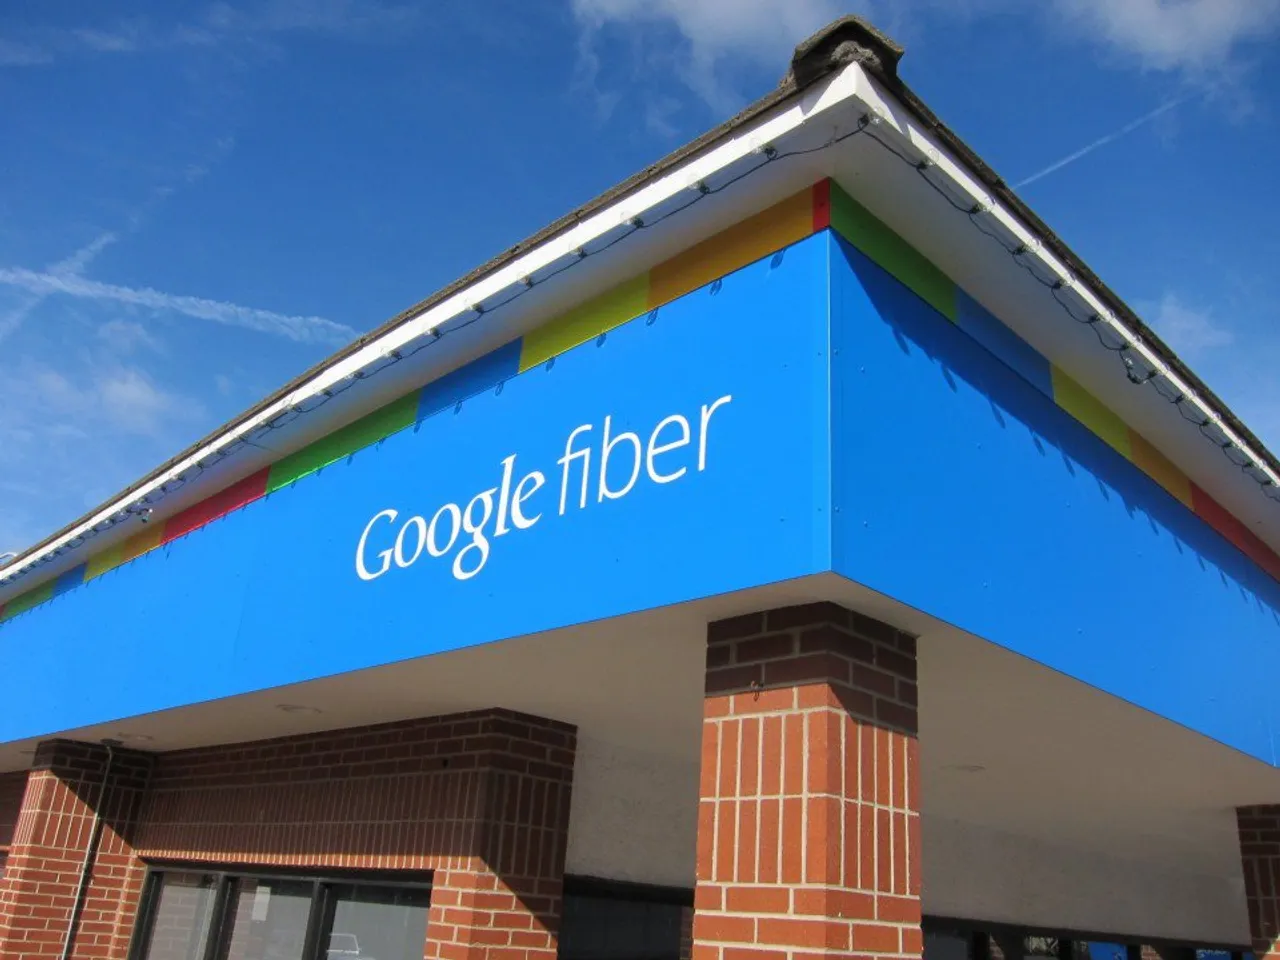 CIOL Google halts Fiber rollout in 11 US cities with CEO Craig Barrett stepping down